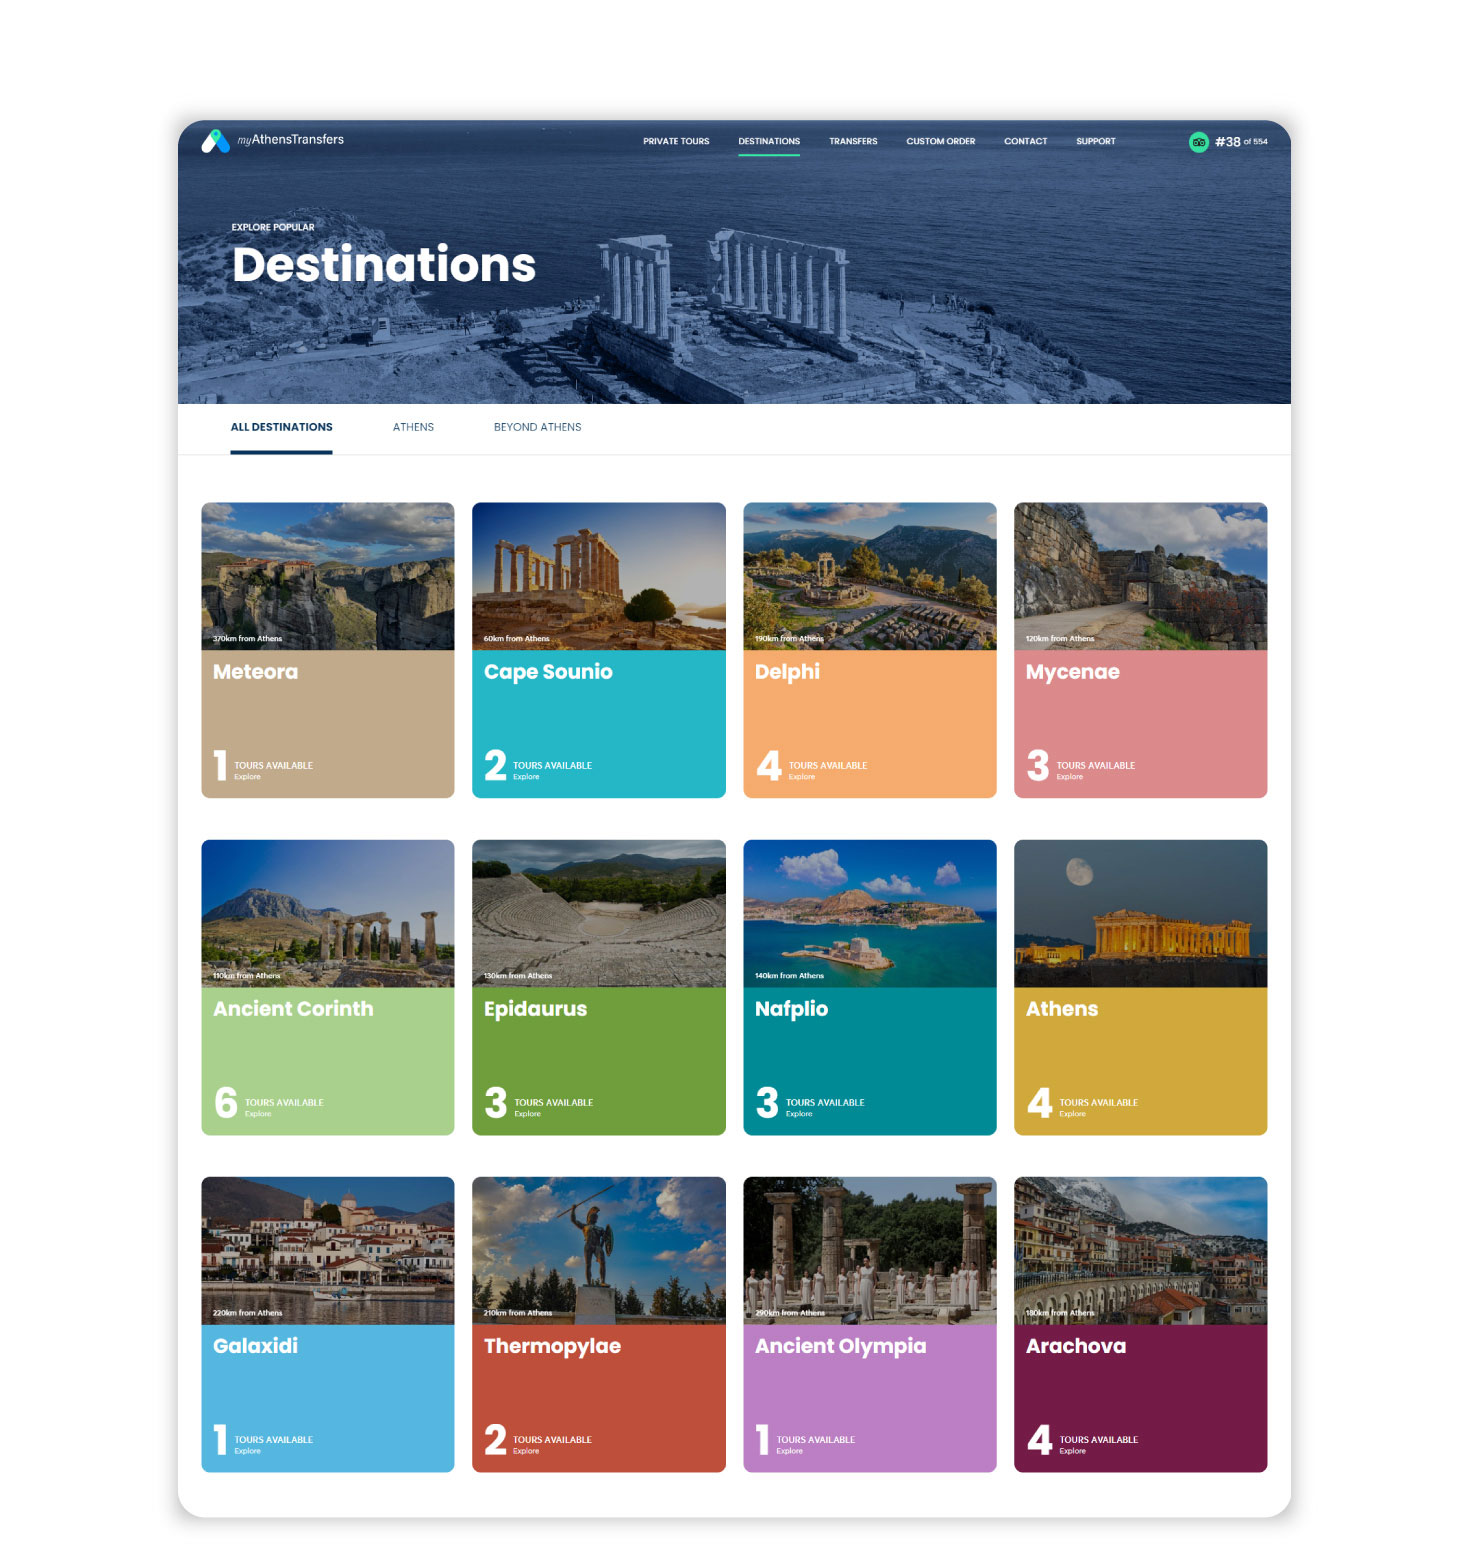 The page where you can see the destinations all together  WEB DESIGN AND DEVELOPMENT